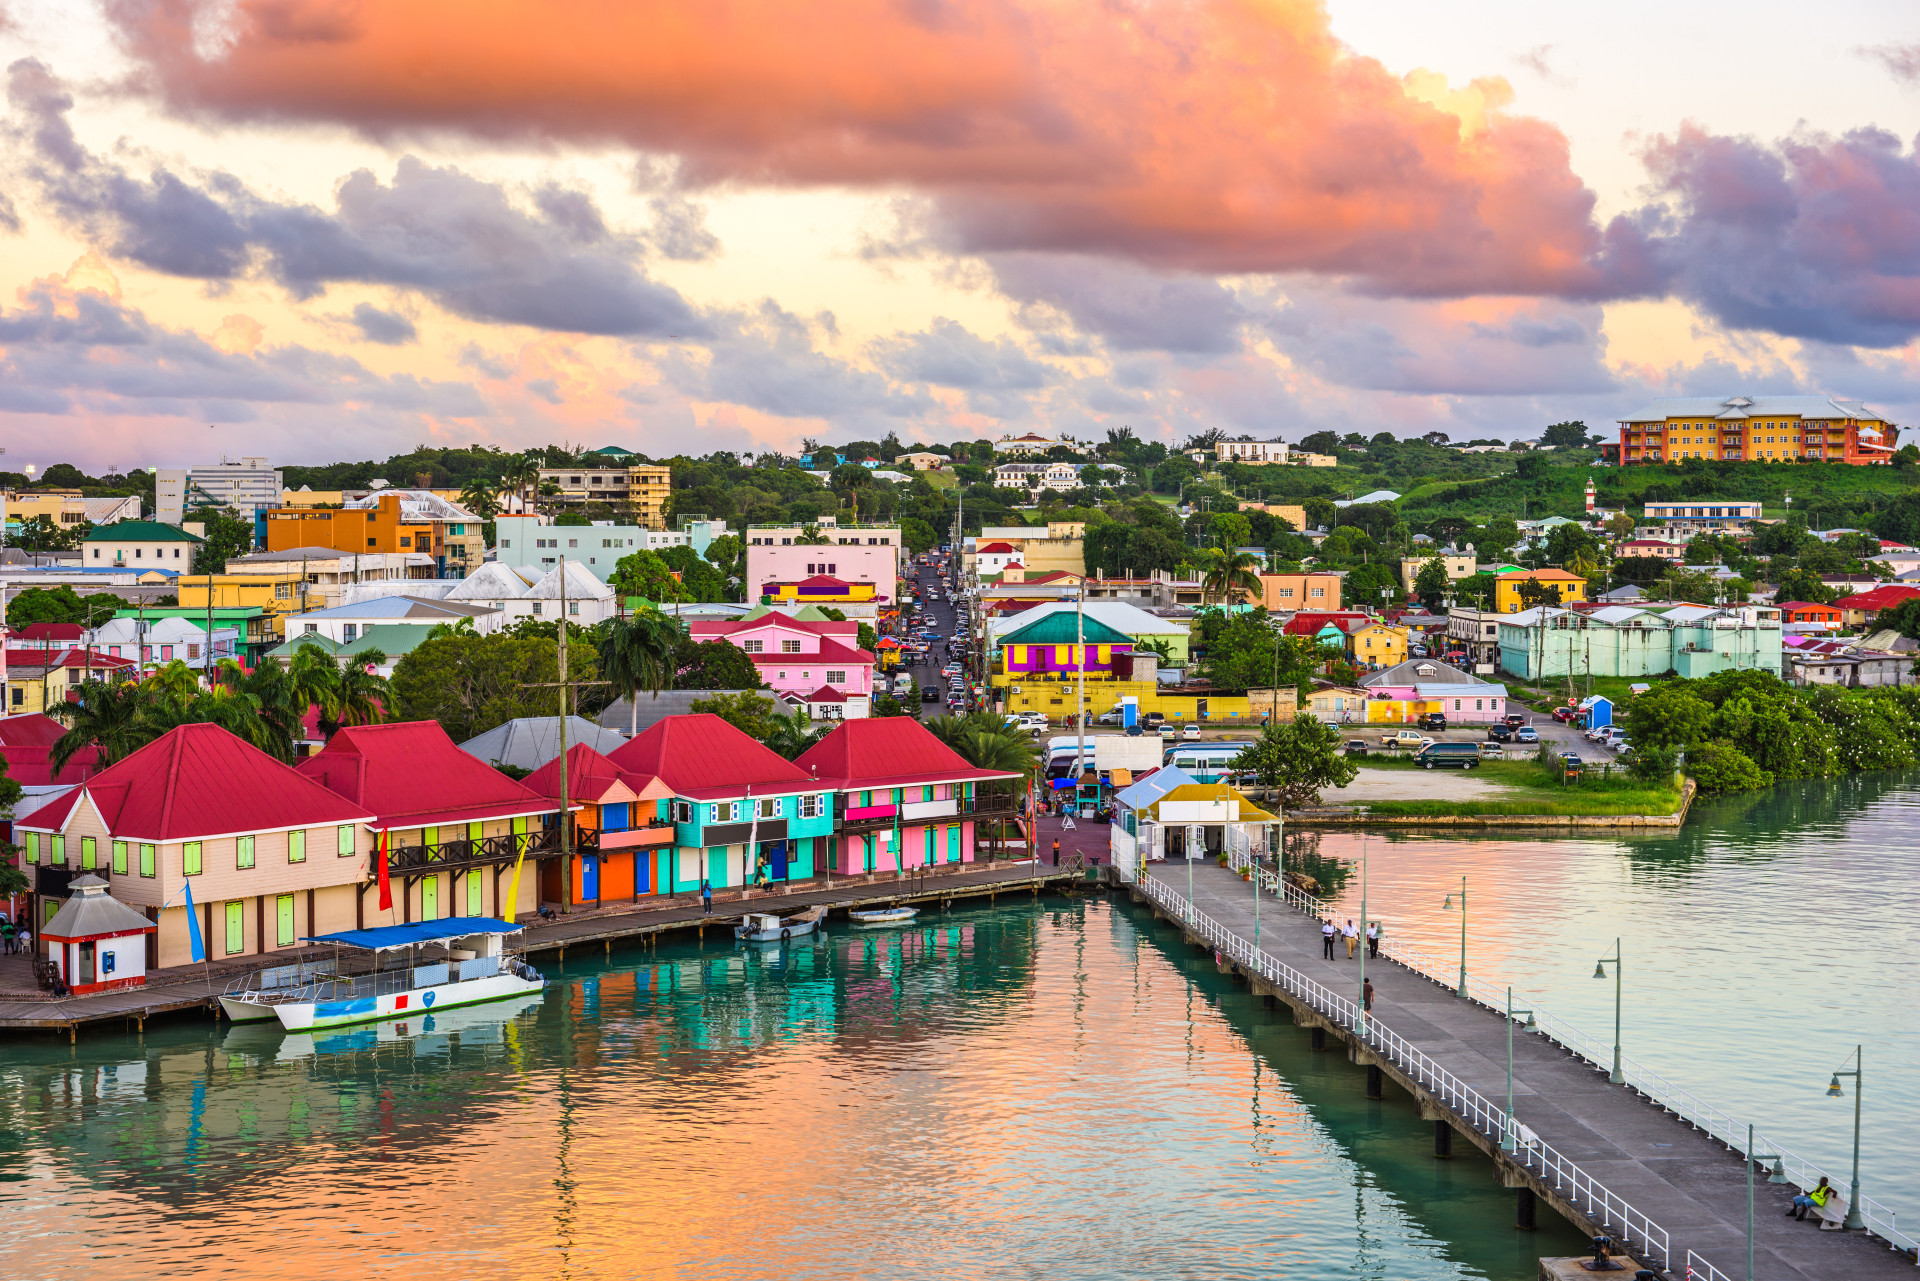 Like most destinations in the Caribbean, Antigua and Barbuda is a country that blends culture, history, and beautiful scenery.<p>You may also like:<a href="https://www.starsinsider.com/n/439901?utm_source=msn.com&utm_medium=display&utm_campaign=referral_description&utm_content=210974v3en-ae"> 30 things only divorced people know</a></p>